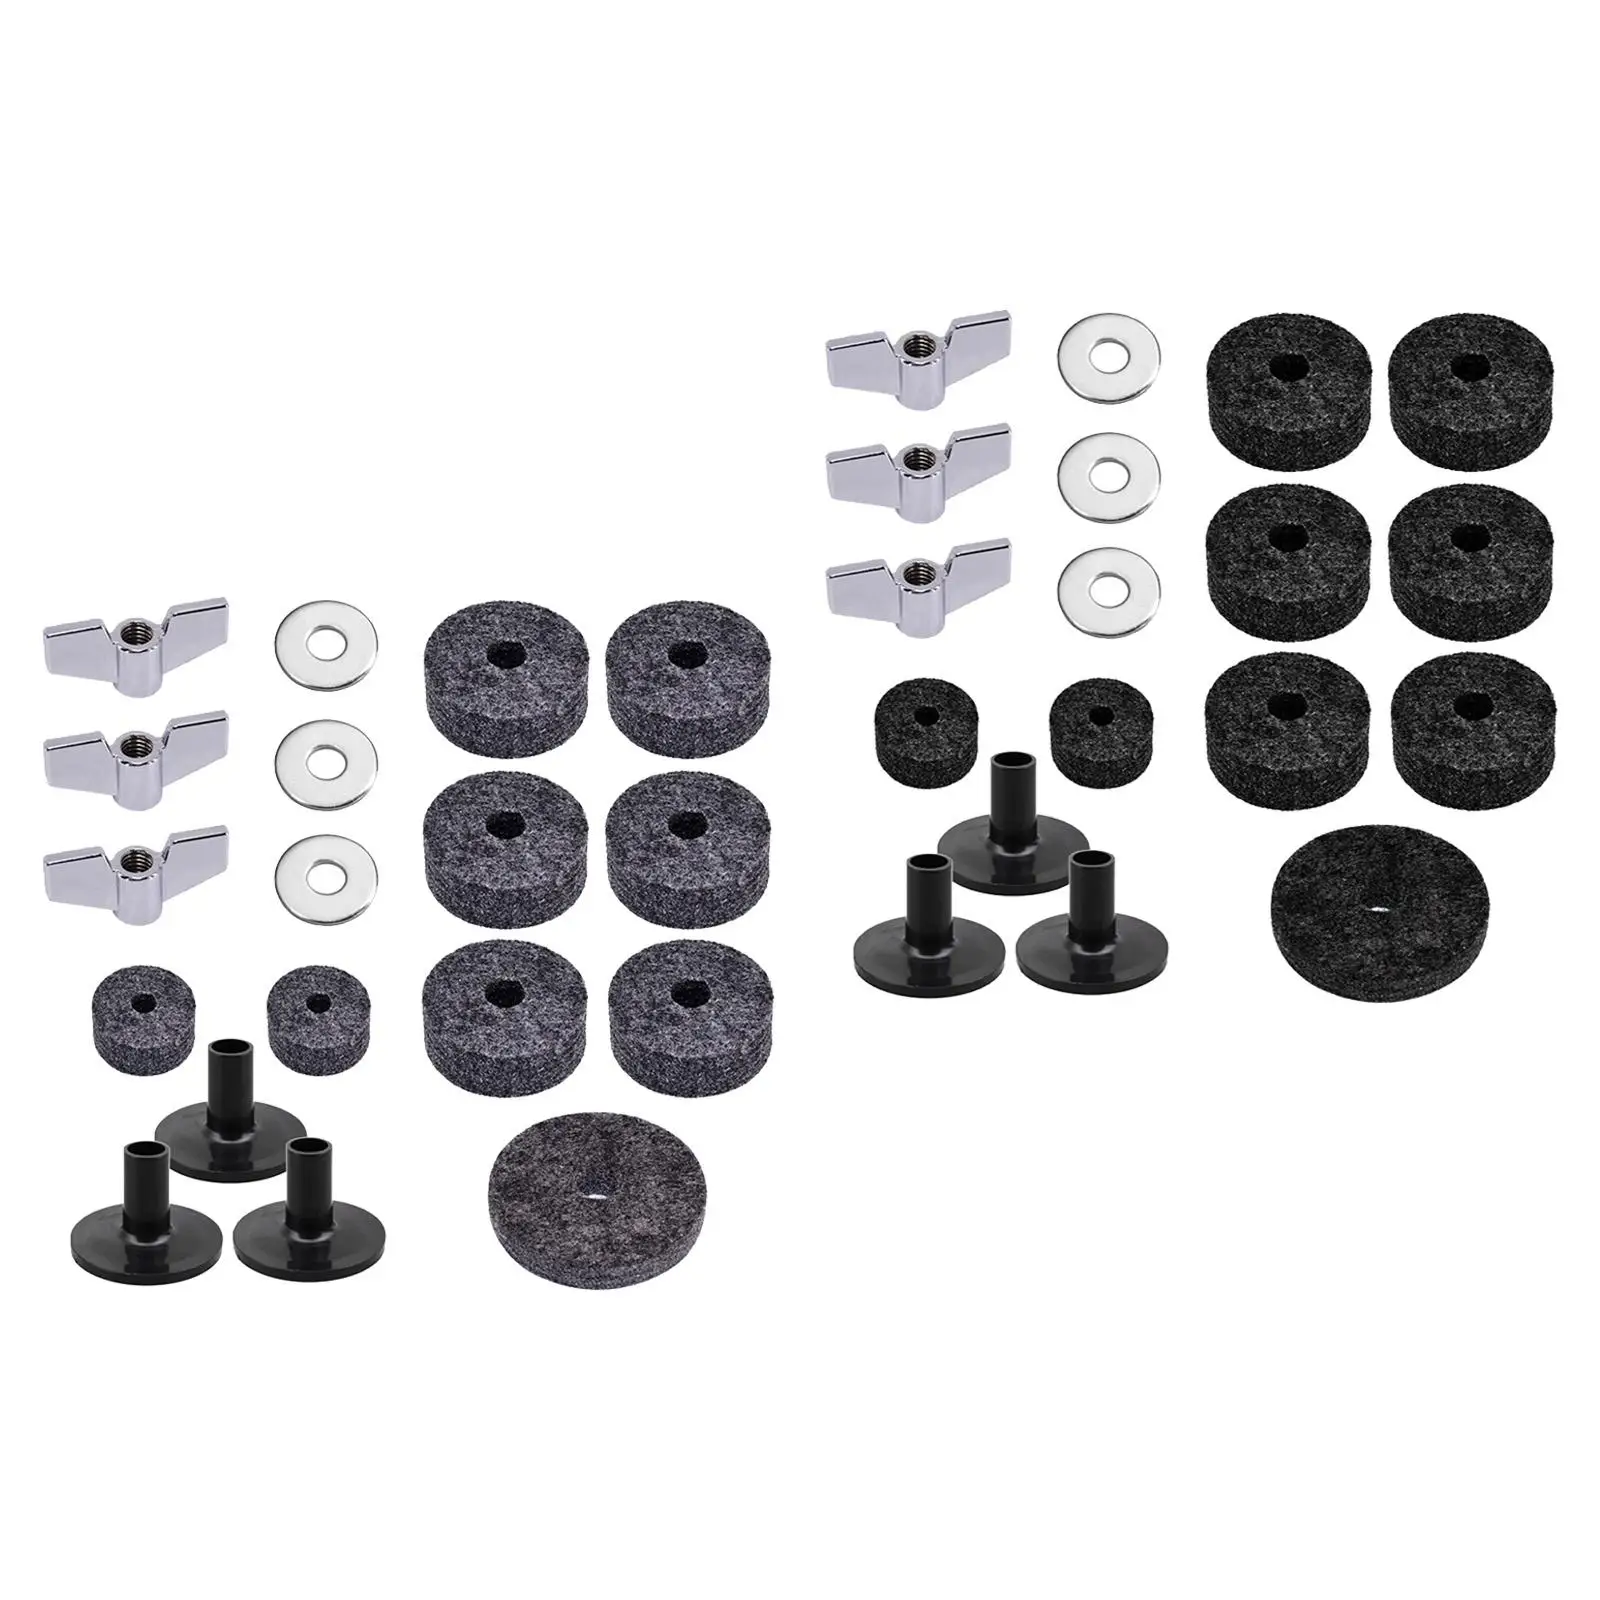 Drum Replacement Parts, Cymbal Felts Washers Percussion Instruments, Wing Nuts, Musical Accessories, Attachment for Musician